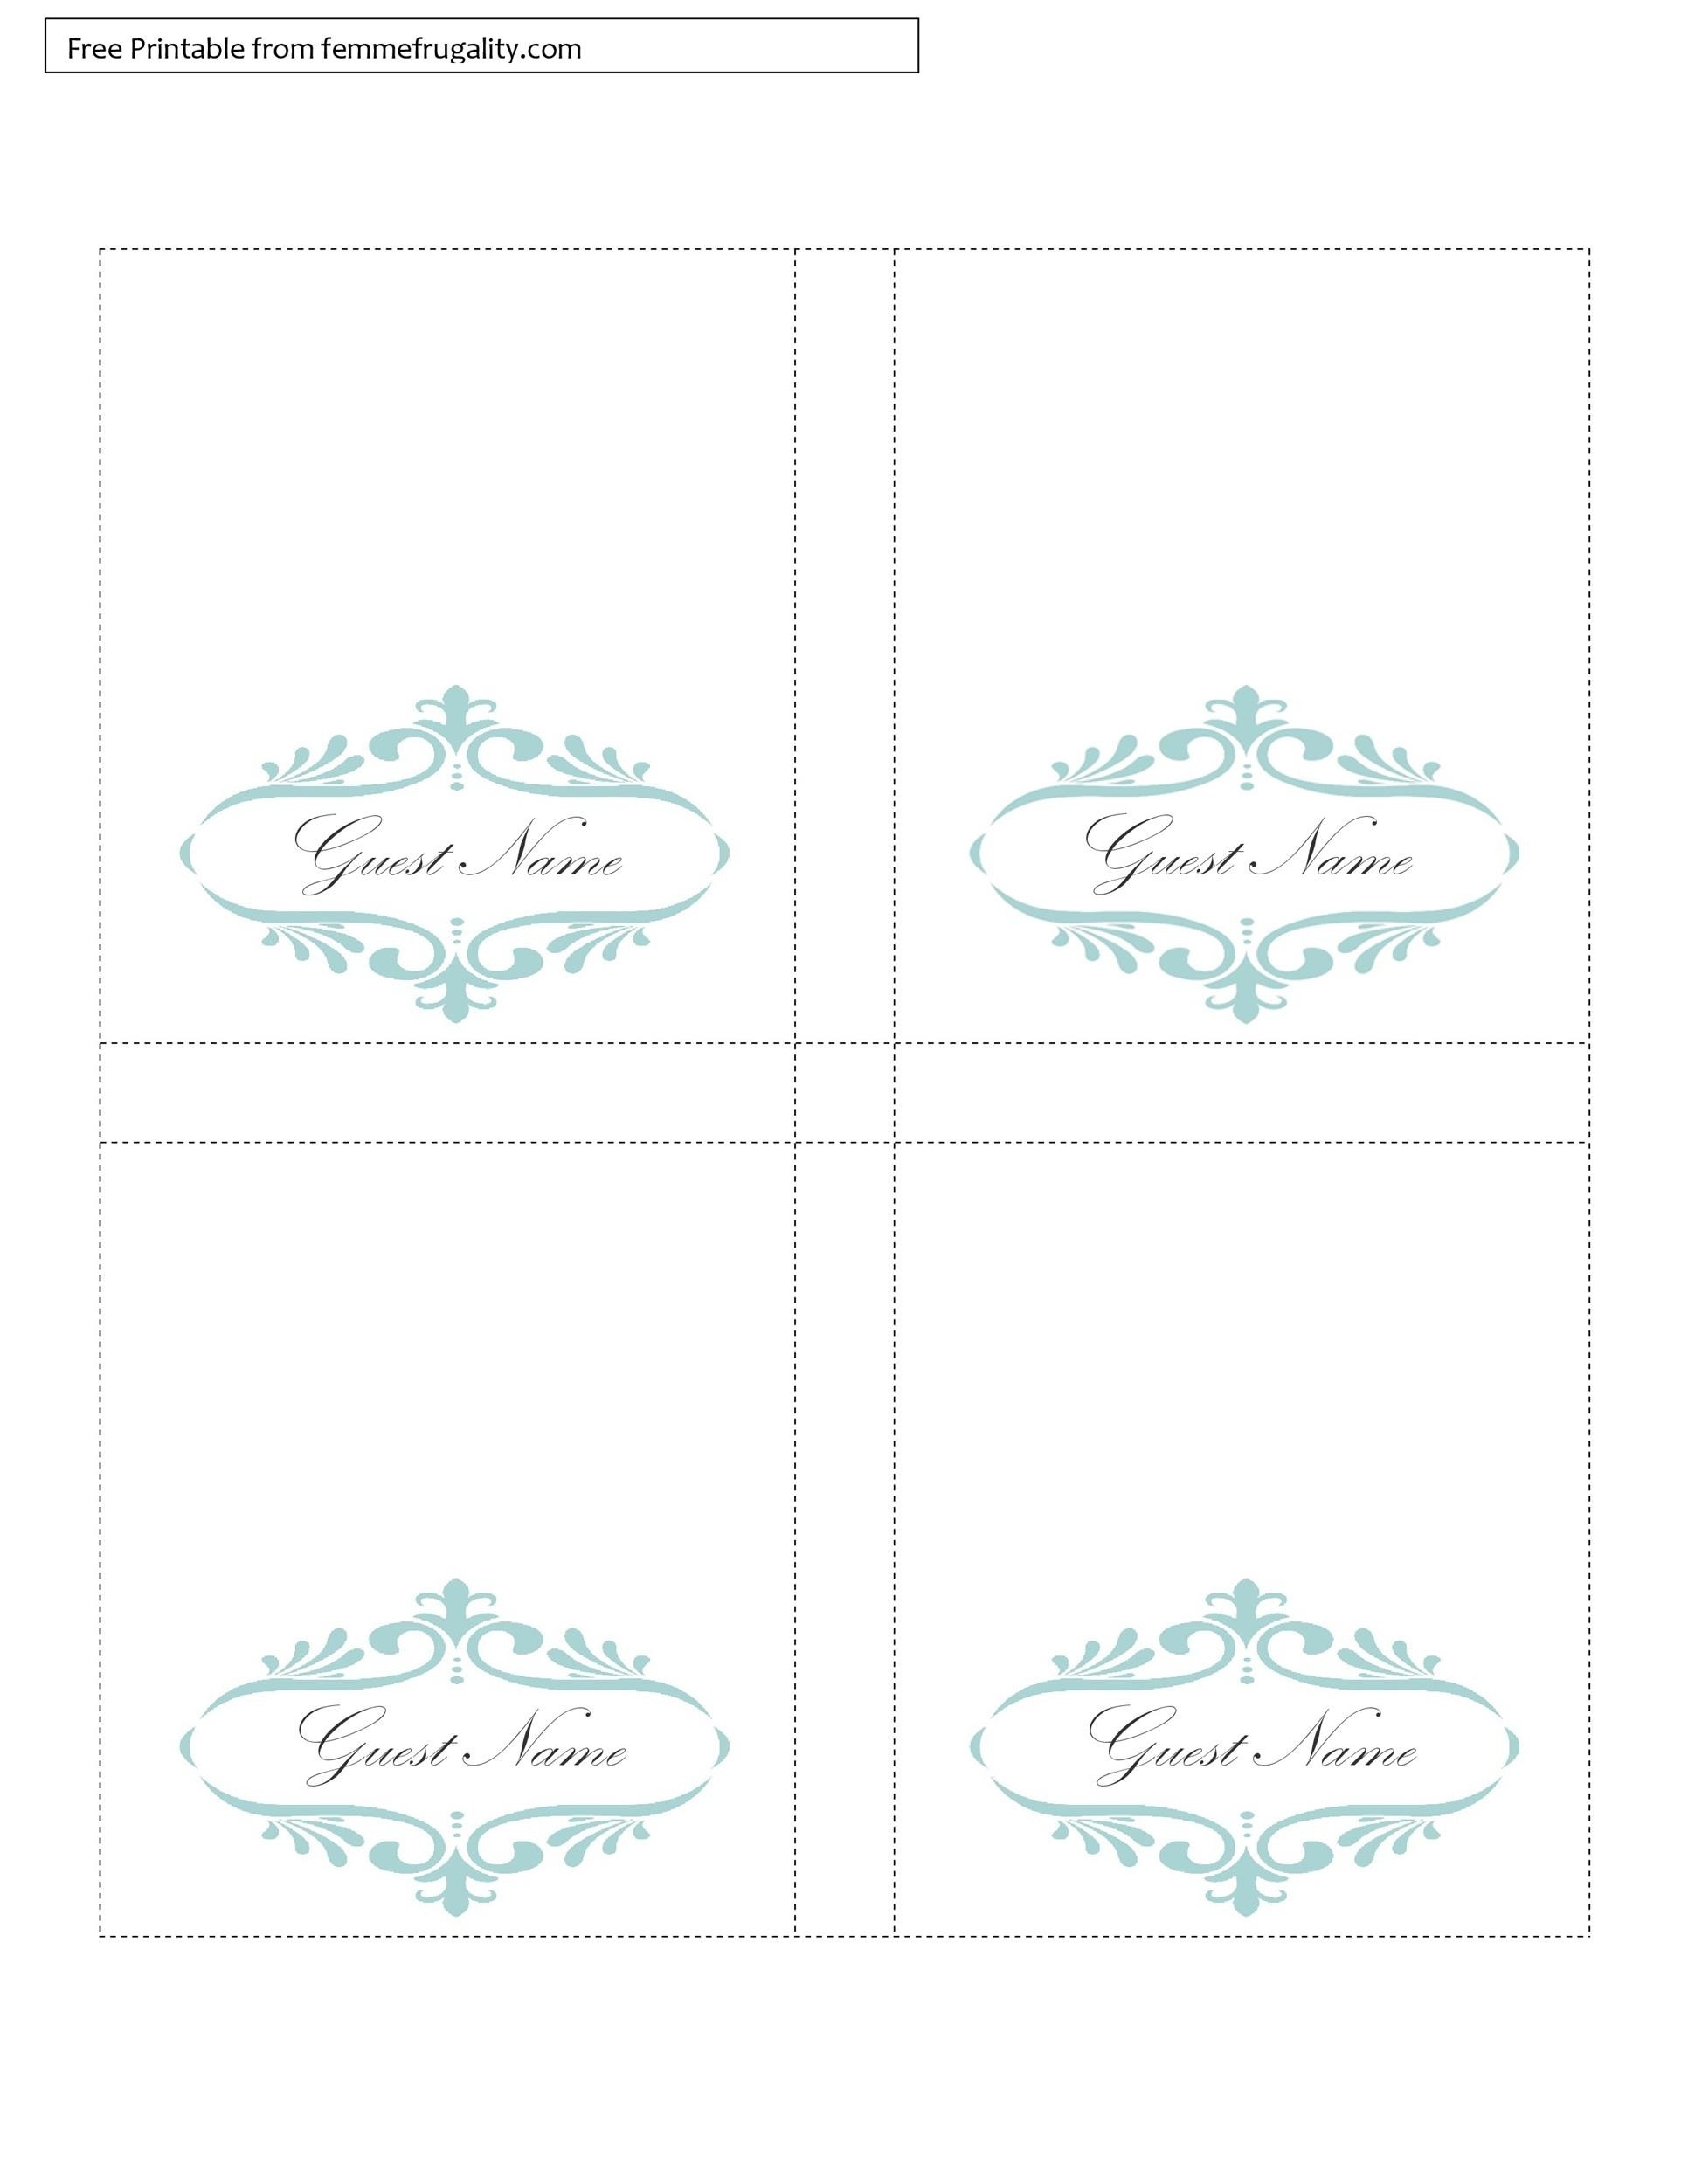 16 Printable Table Tent Templates And Cards ᐅ Templatelab Throughout Free Printable Tent Card Template